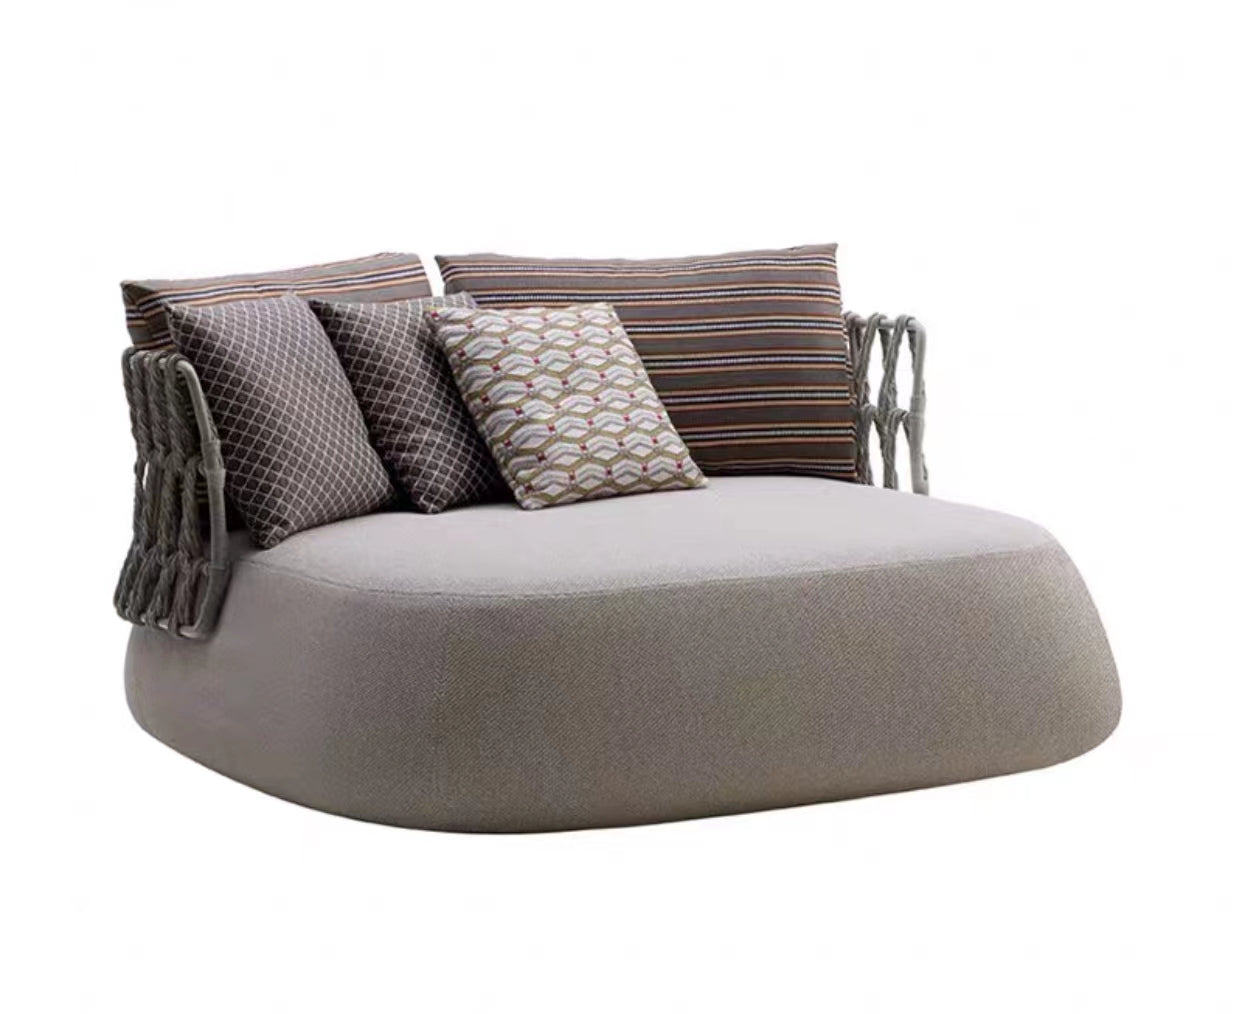 Baggett Wicker Seating Group with Cushions - 4 Seasons Home Gadgets